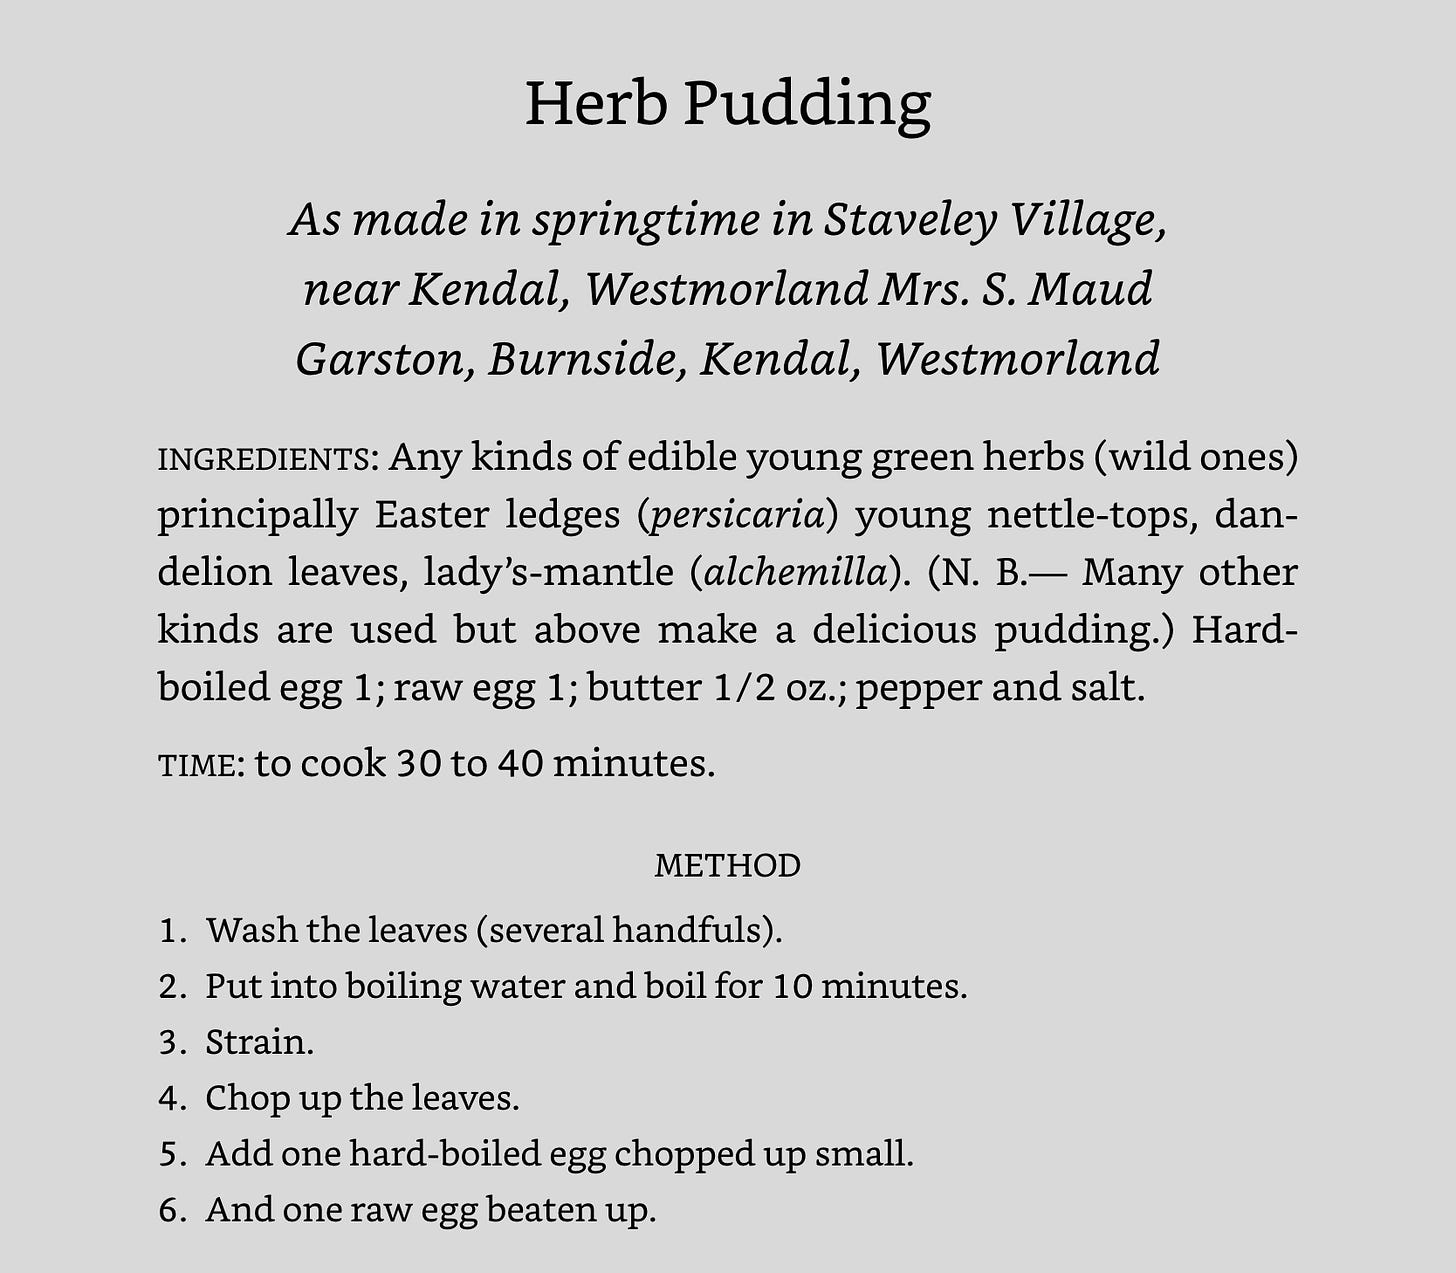 Herb Pudding As made in springtime in Staveley Village, near Kendal, Westmorland Mrs. S. Maud Garston, Burnside, Kendal, Westmorland INGREDIENTS: Any kinds of edible young green herbs (wild ones) principally Easter ledges (persicaria) young nettle-tops, dandelion leaves, lady’s-mantle (alchemilla). (N. B.— Many other kinds are used but above make a delicious pudding.) Hard-boiled egg 1; raw egg 1; butter 1/2 oz.; pepper and salt. TIME: to cook 30 to 40 minutes. METHOD 1.​Wash the leaves (several handfuls). 2.​Put into boiling water and boil for 10 minutes. 3.​Strain. 4.​Chop up the leaves. 5.​Add one hard-boiled egg chopped up small. 6.​And one raw egg beaten up.